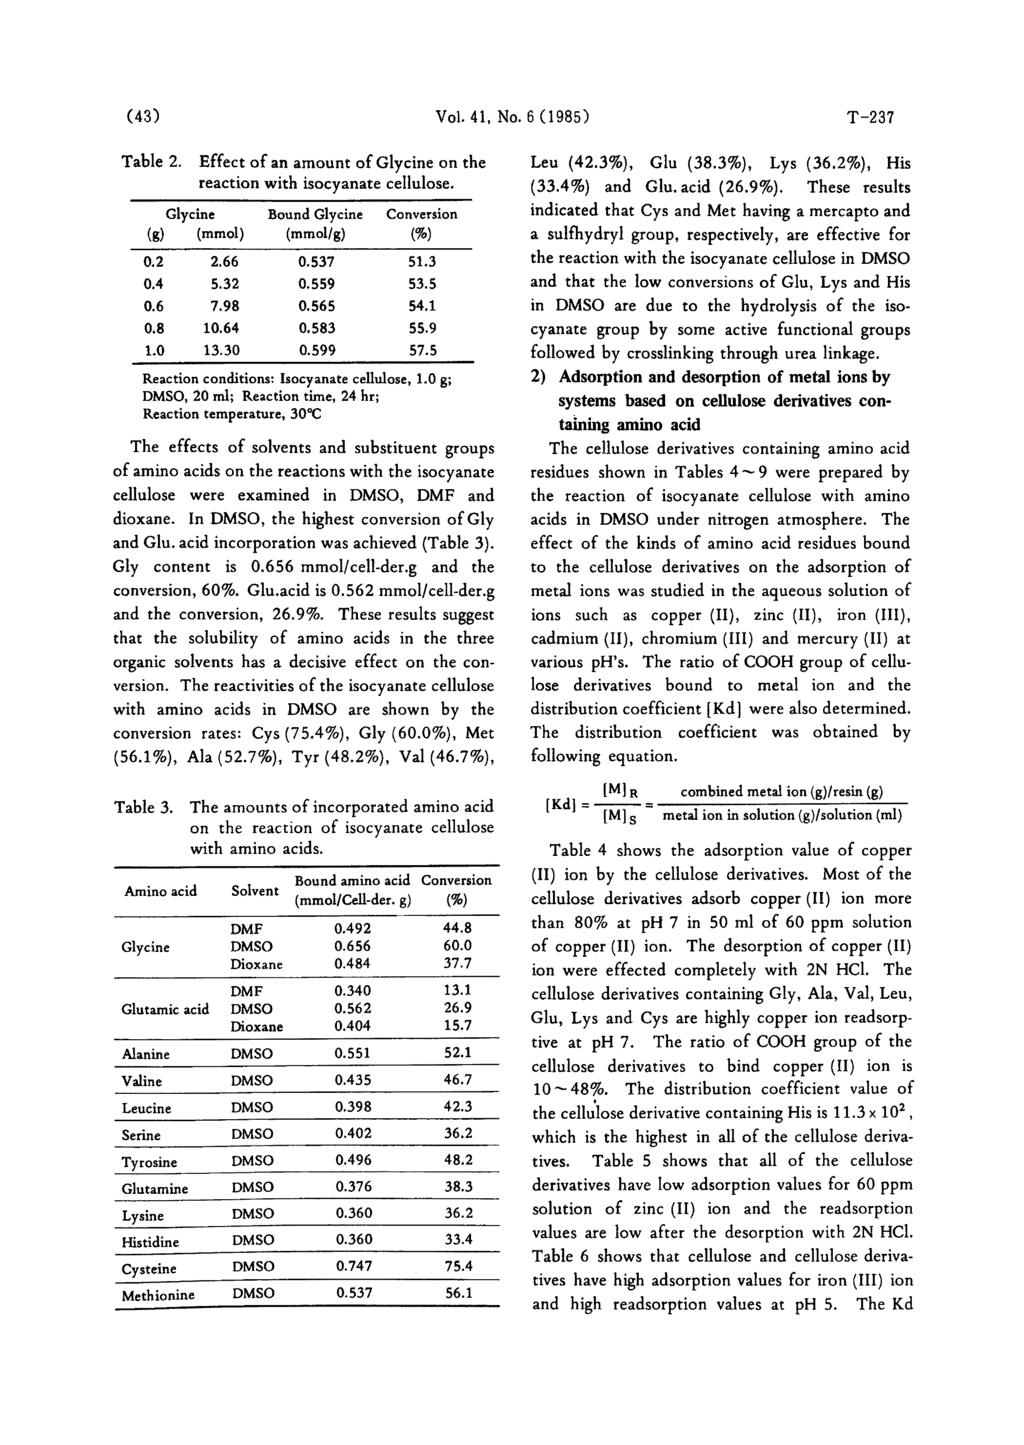 (43) Vol. 41, No.6 (1985) T-237 Table 2. Effect of an amount of Glycine on the reaction with isocyanate cellulose. Reaction conditions: Isocyanate cellulose, 1.